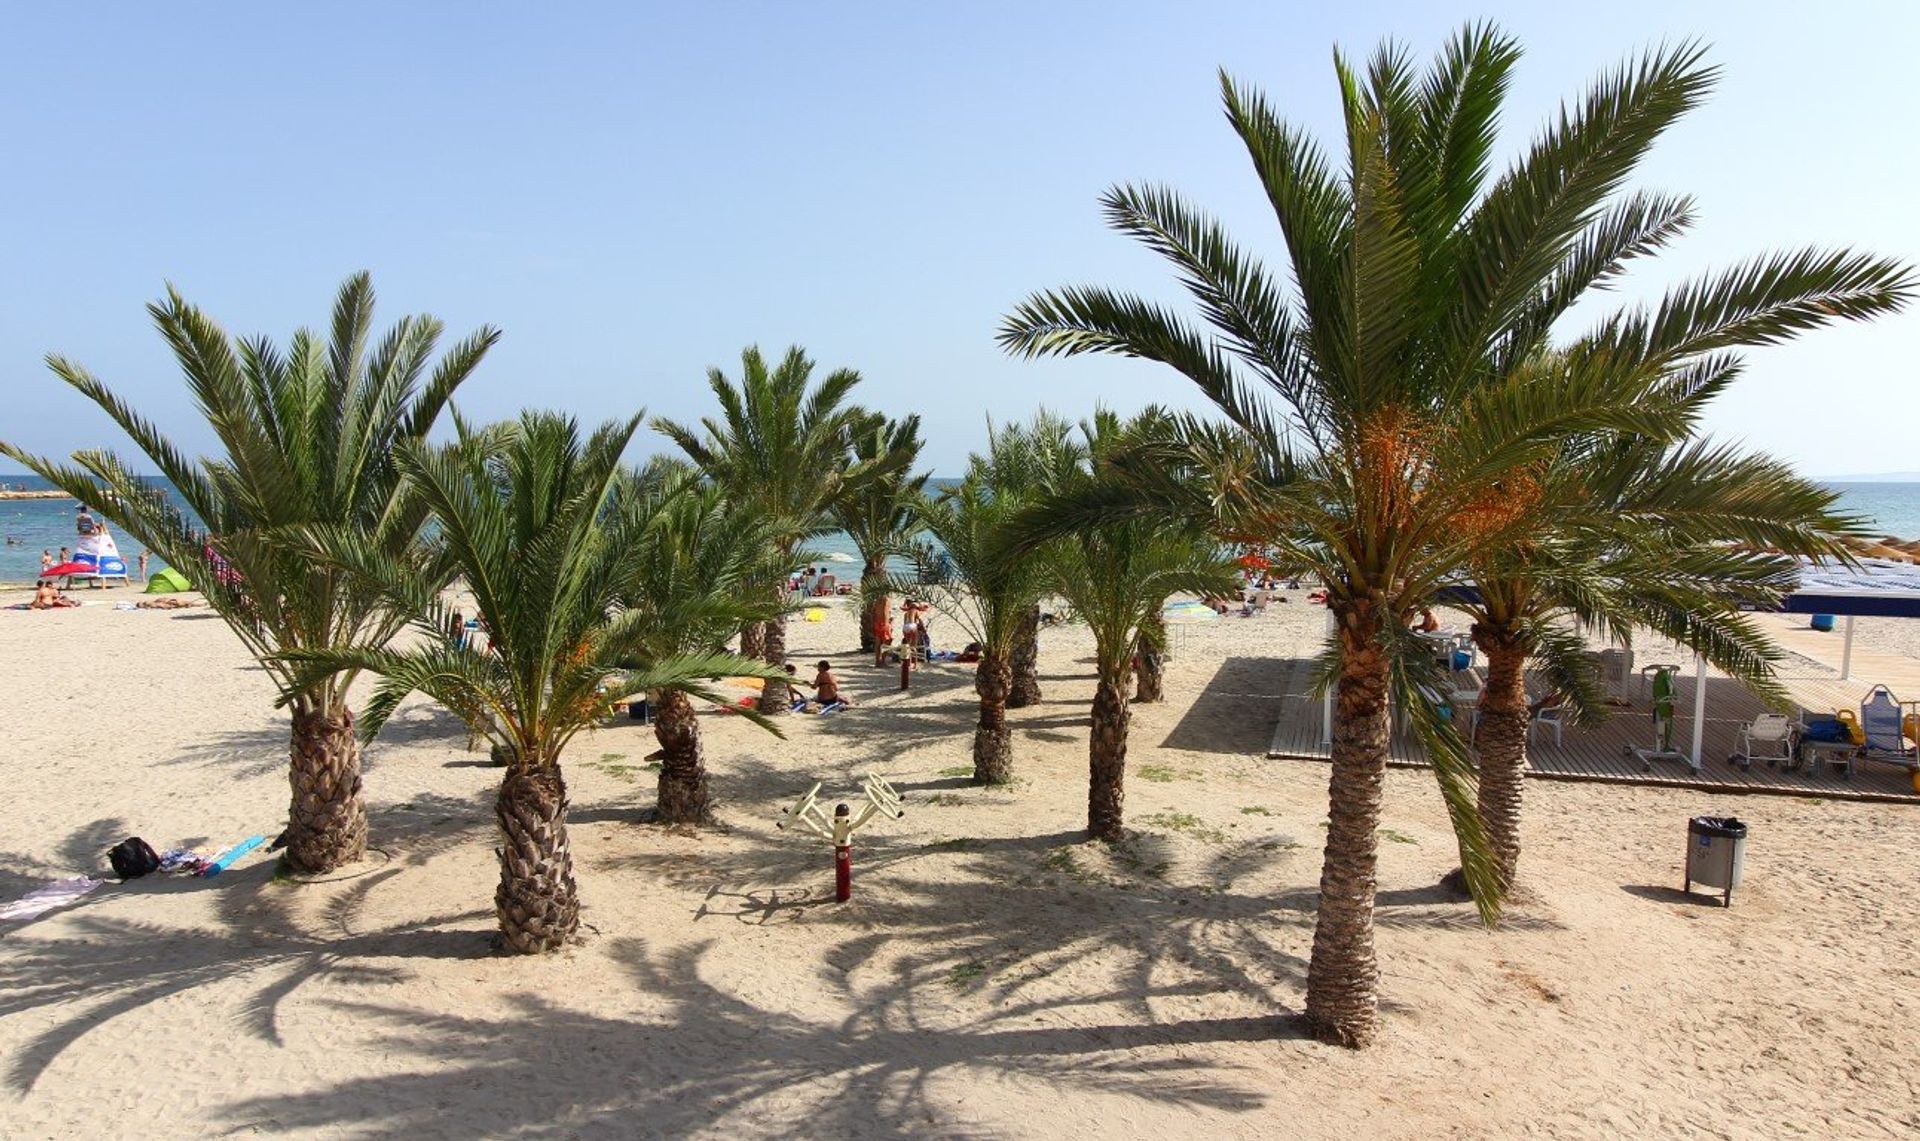 Playa Levante beach is perfect for families, with its shallow waters and palm tree shade spots